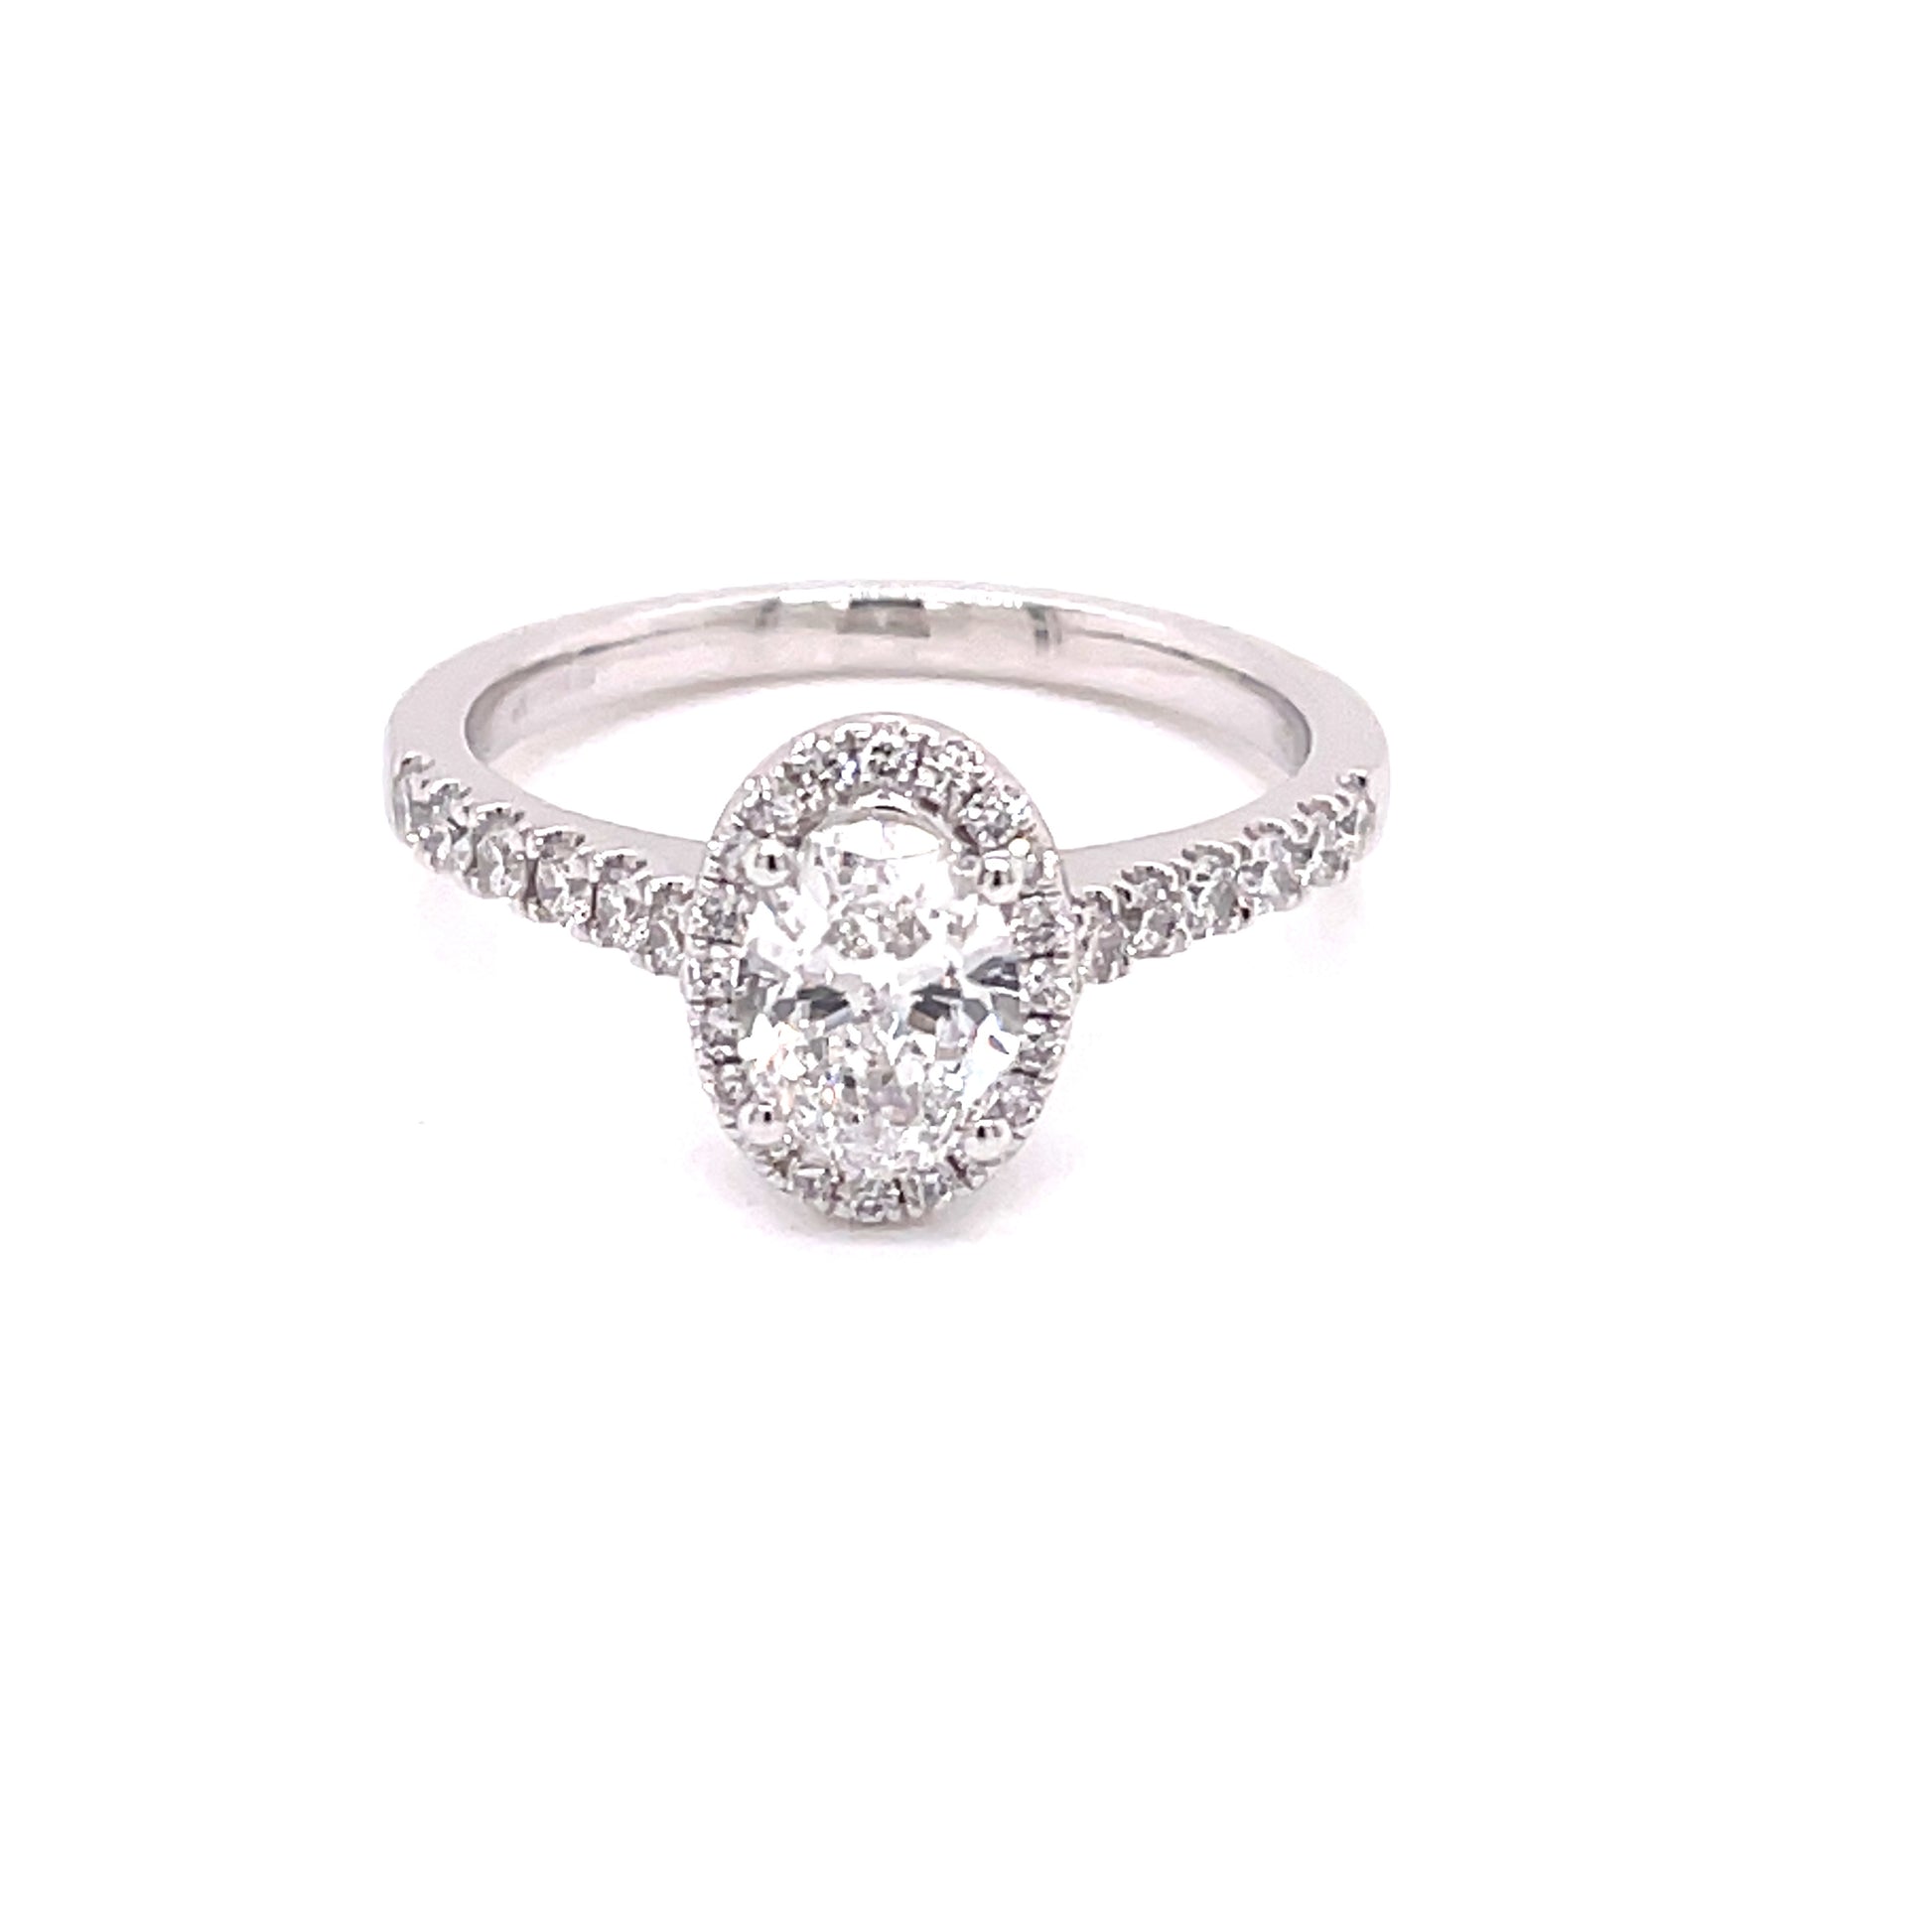 Oval Shaped Diamond Halo Style Ring - 1.05cts  Gardiner Brothers   